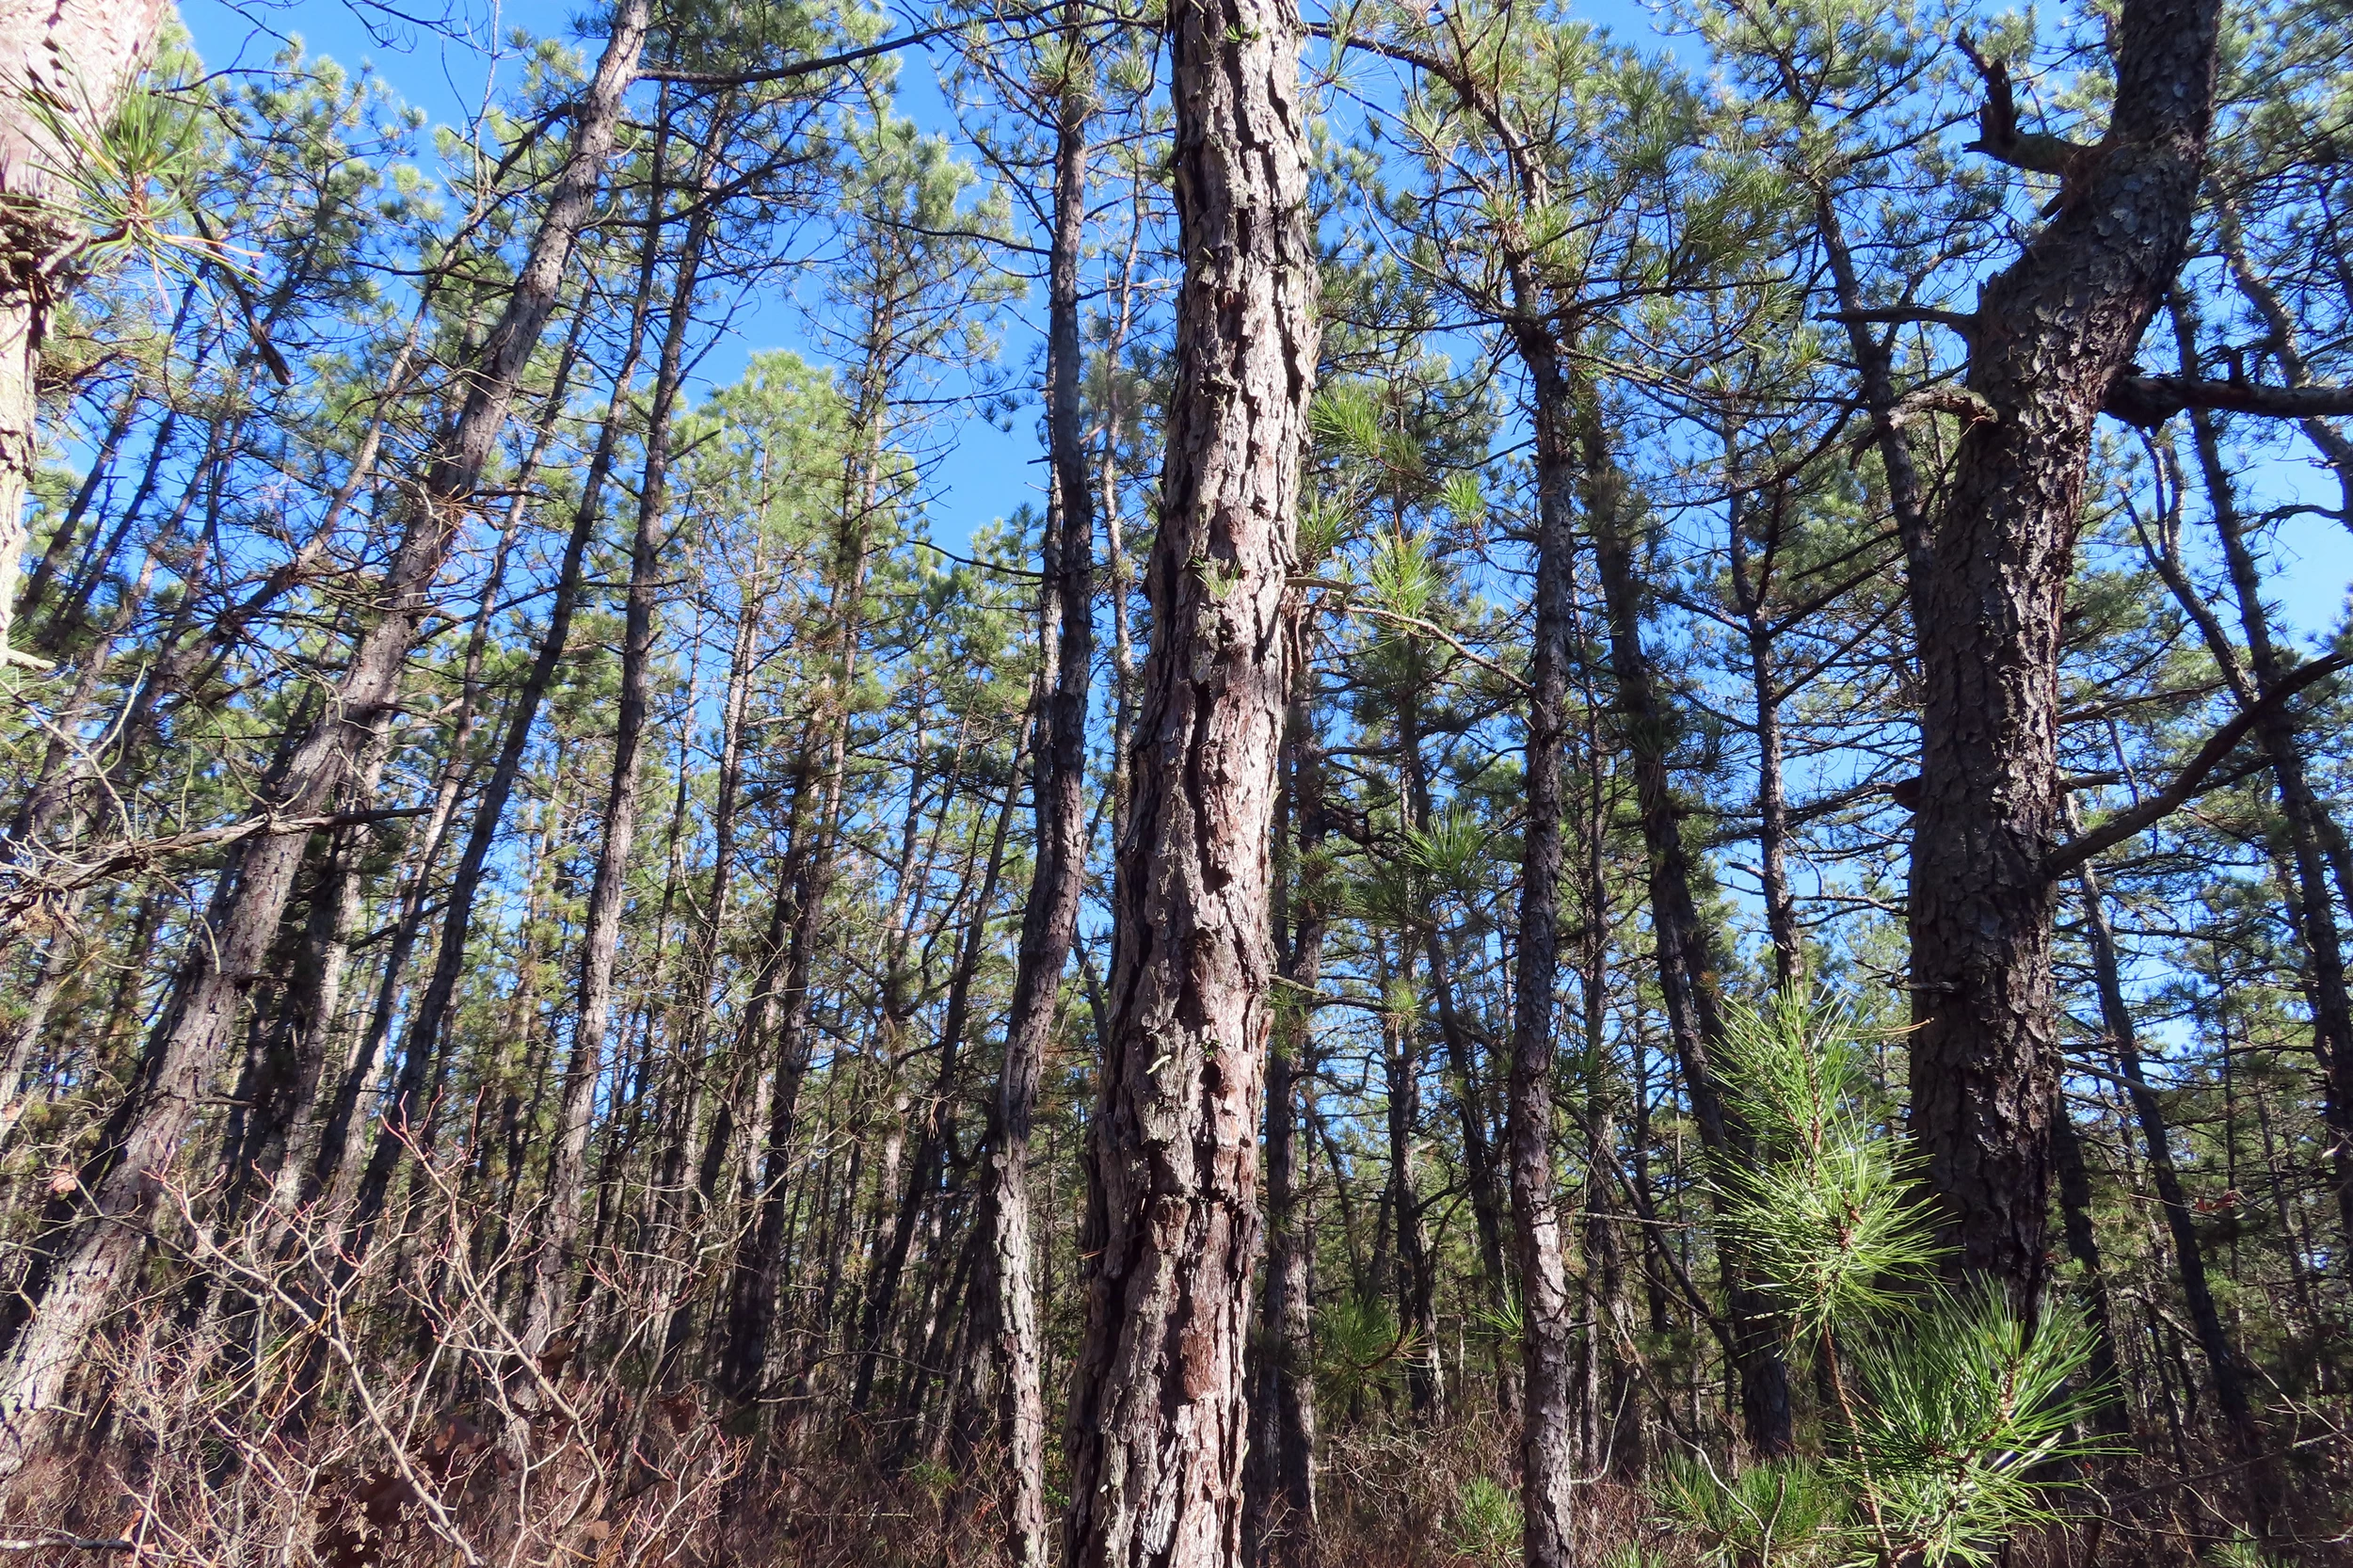 NJ has a plan to chop down 2.4 million trees — to save the
Pinelands?